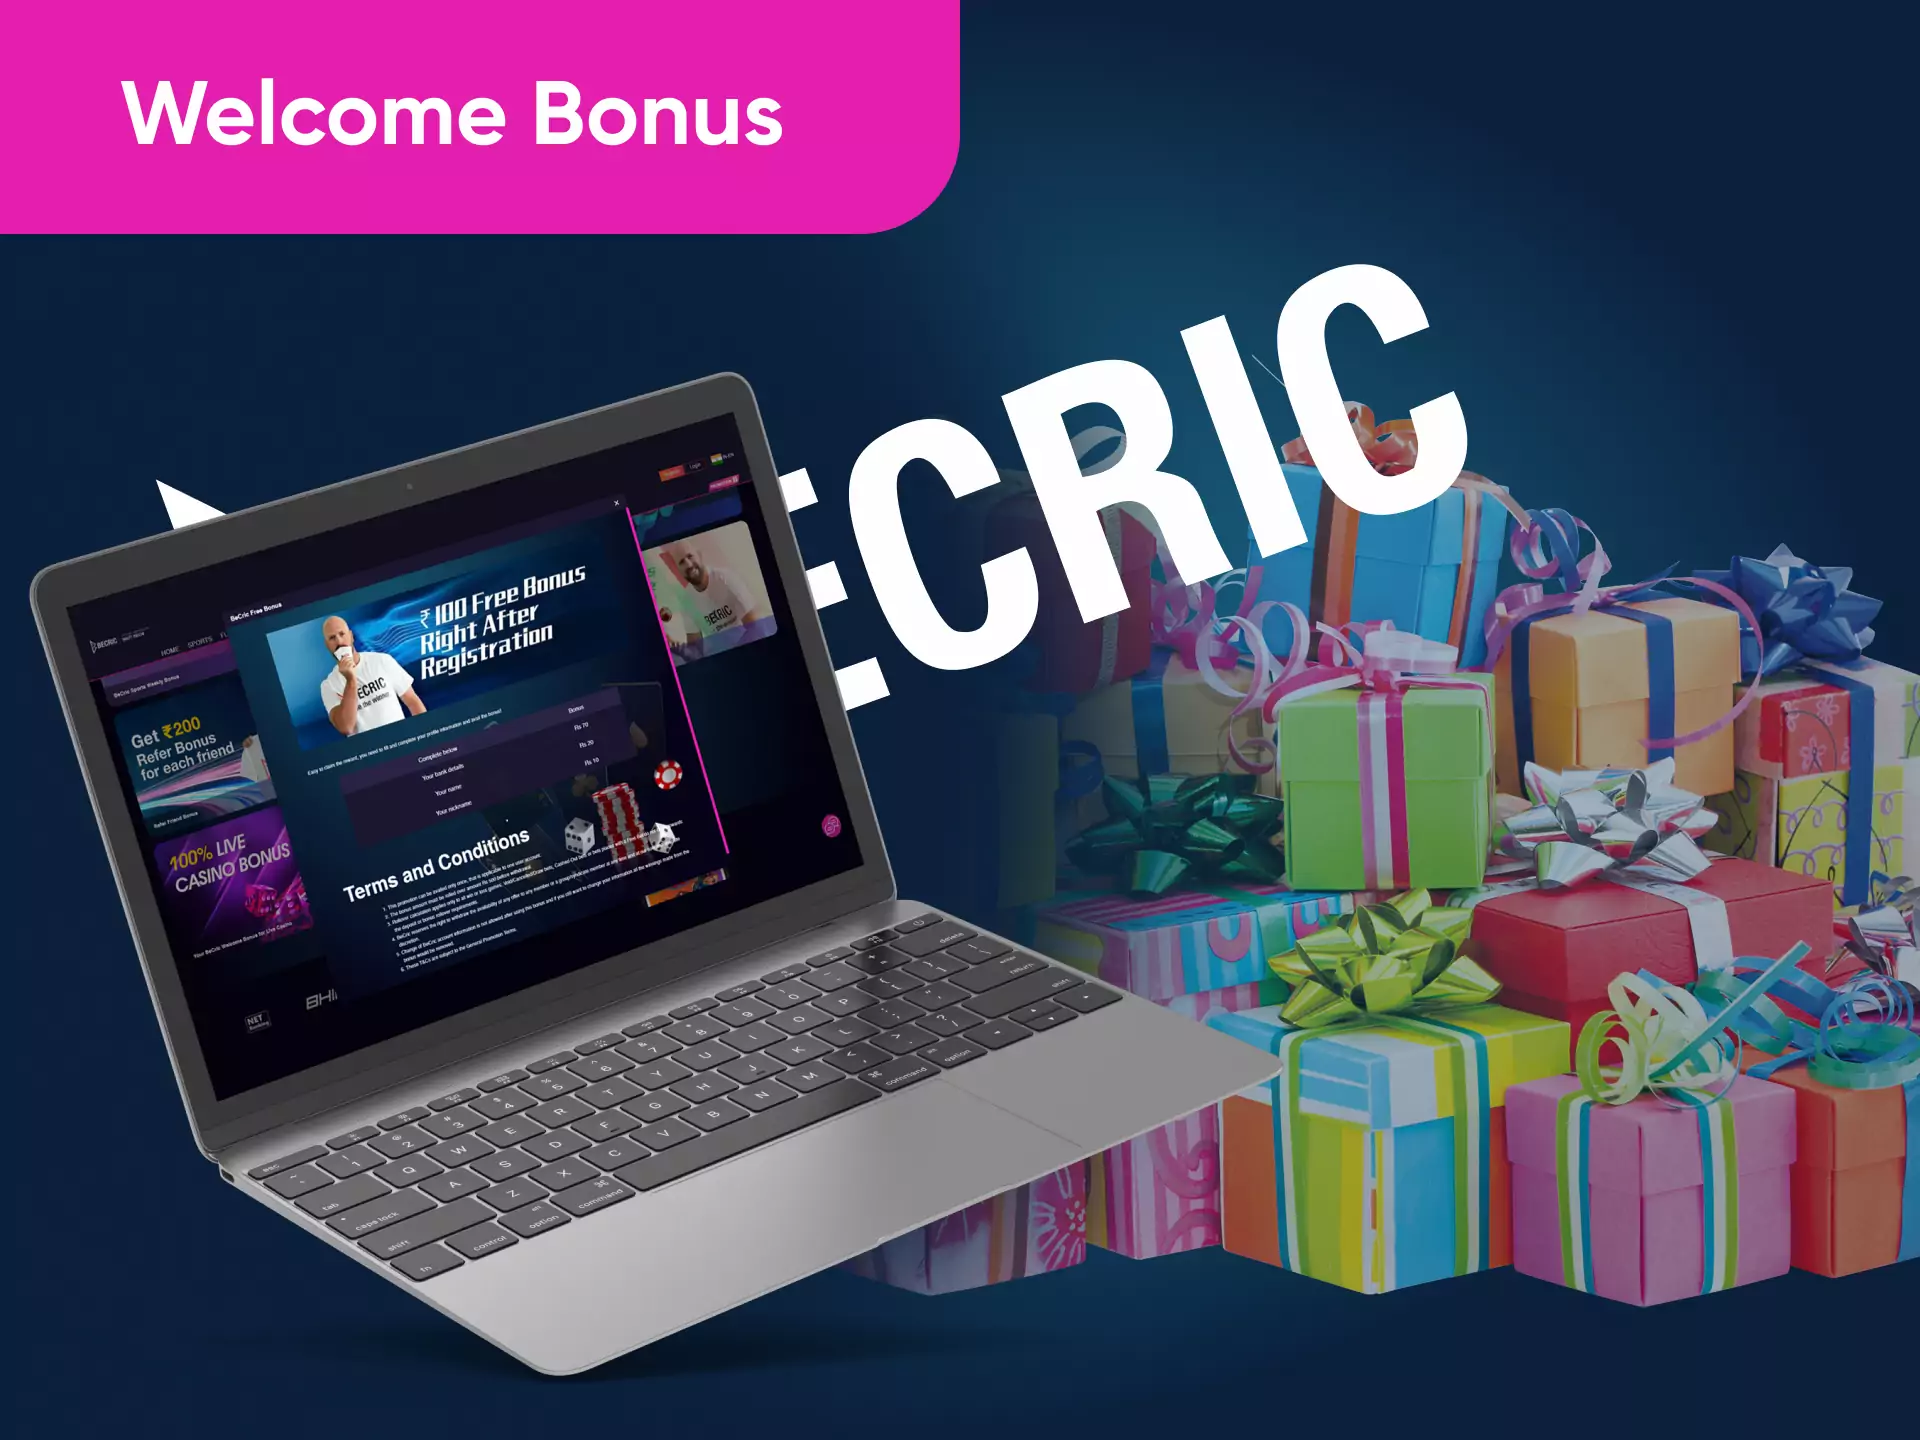 Newcomers get welcome bonuses from Becric.